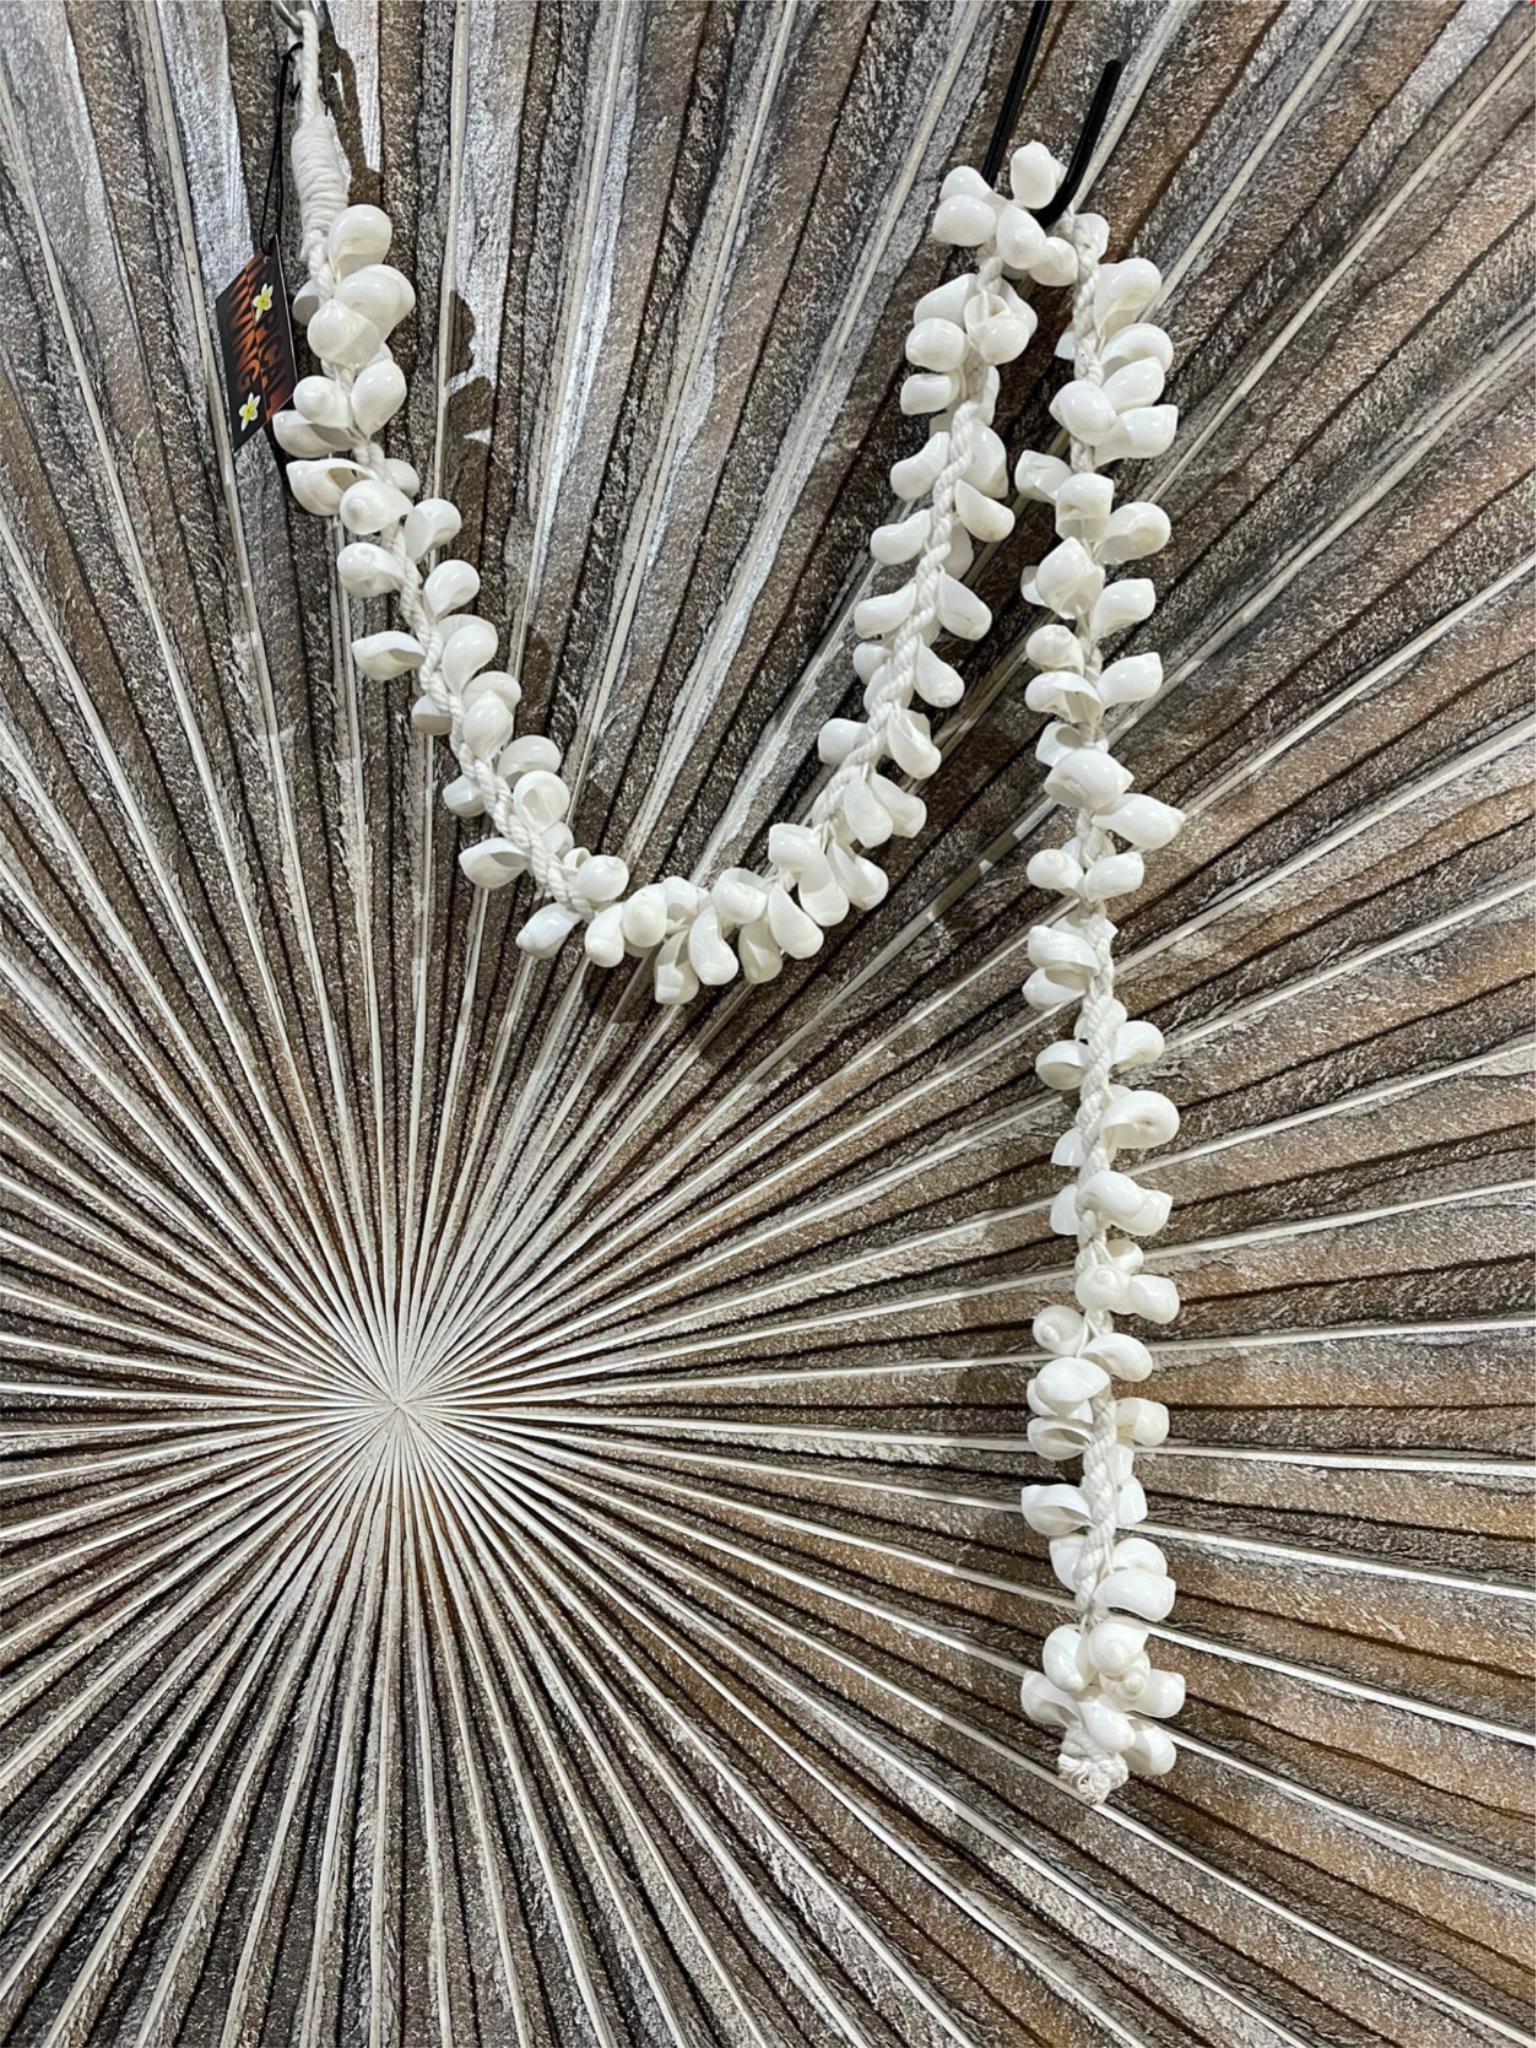 New Hand Crafted Shell Hanger - Bali shells on Rope Decor - Bali